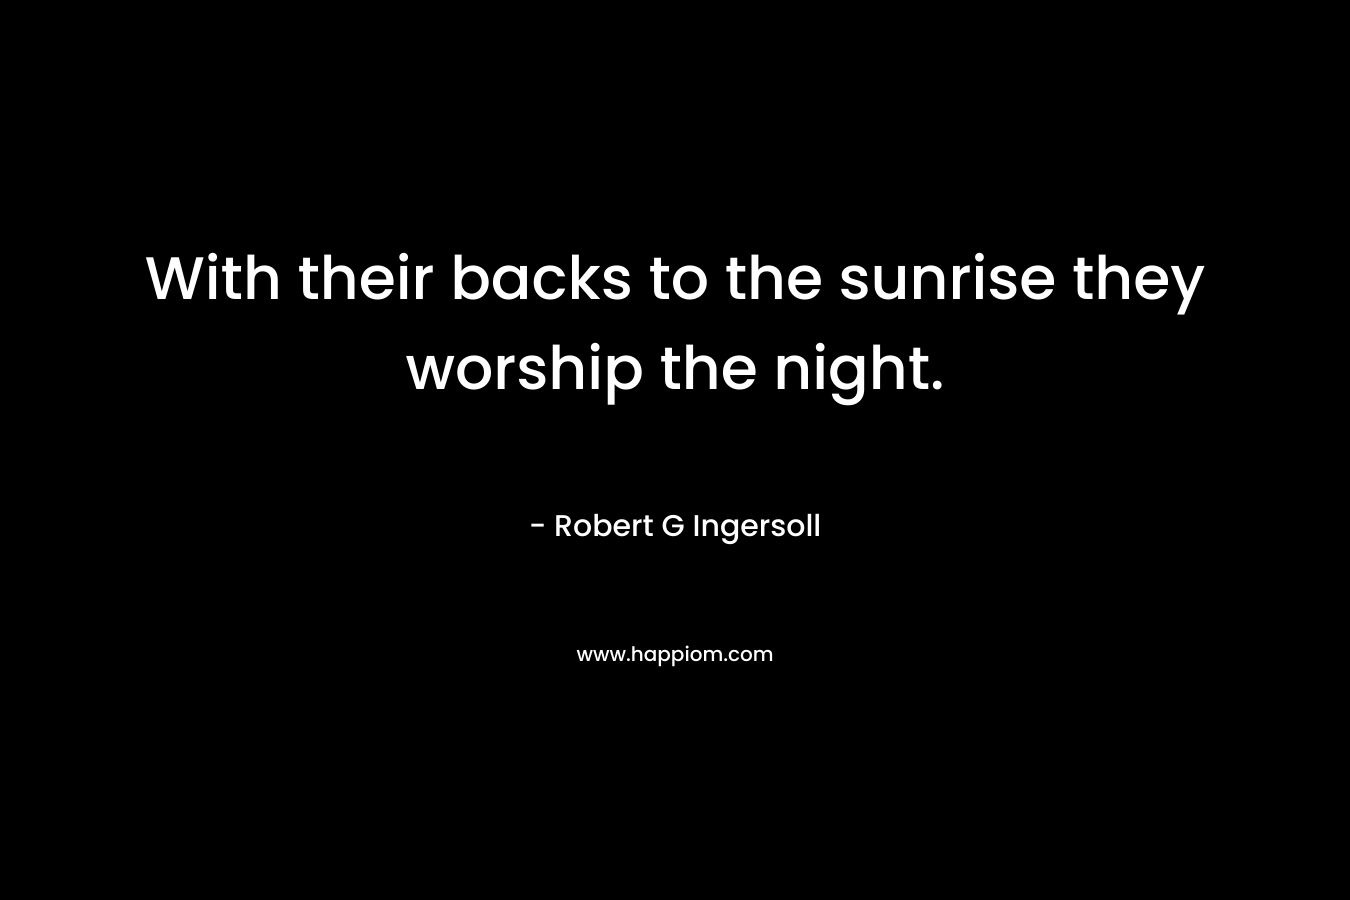 With their backs to the sunrise they worship the night.